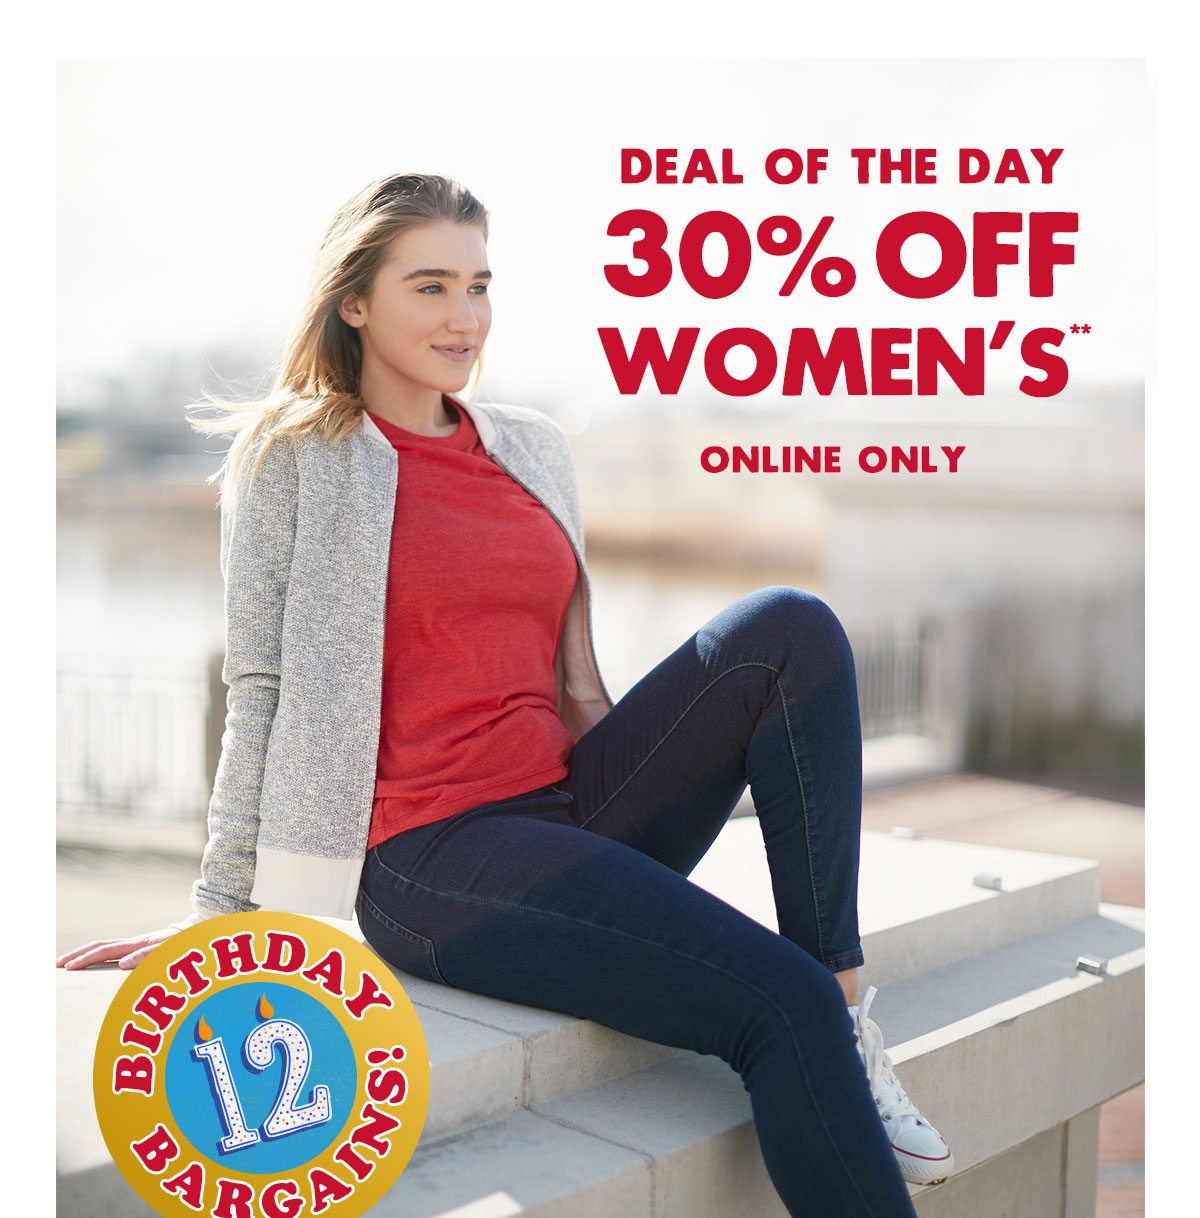 Deal of the Day! 30% Off** Women's, online only.